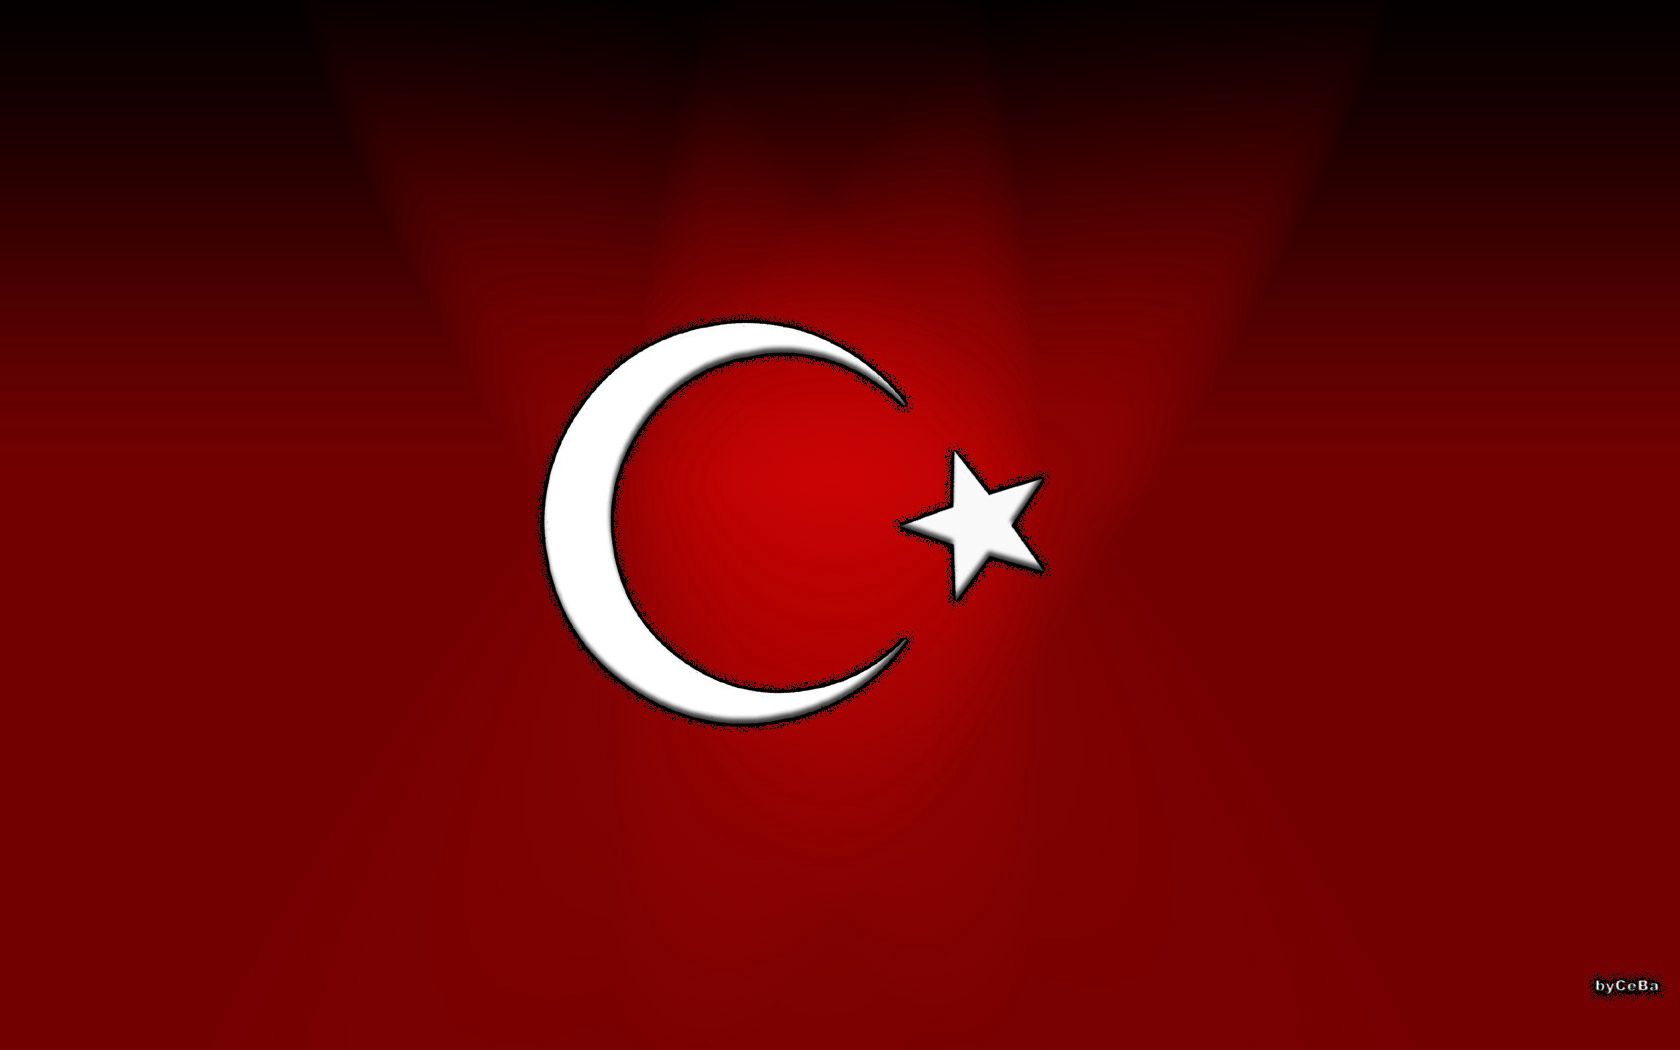 muslims, white, red, miscellanea, miscellaneous, flag, crescent, traditions